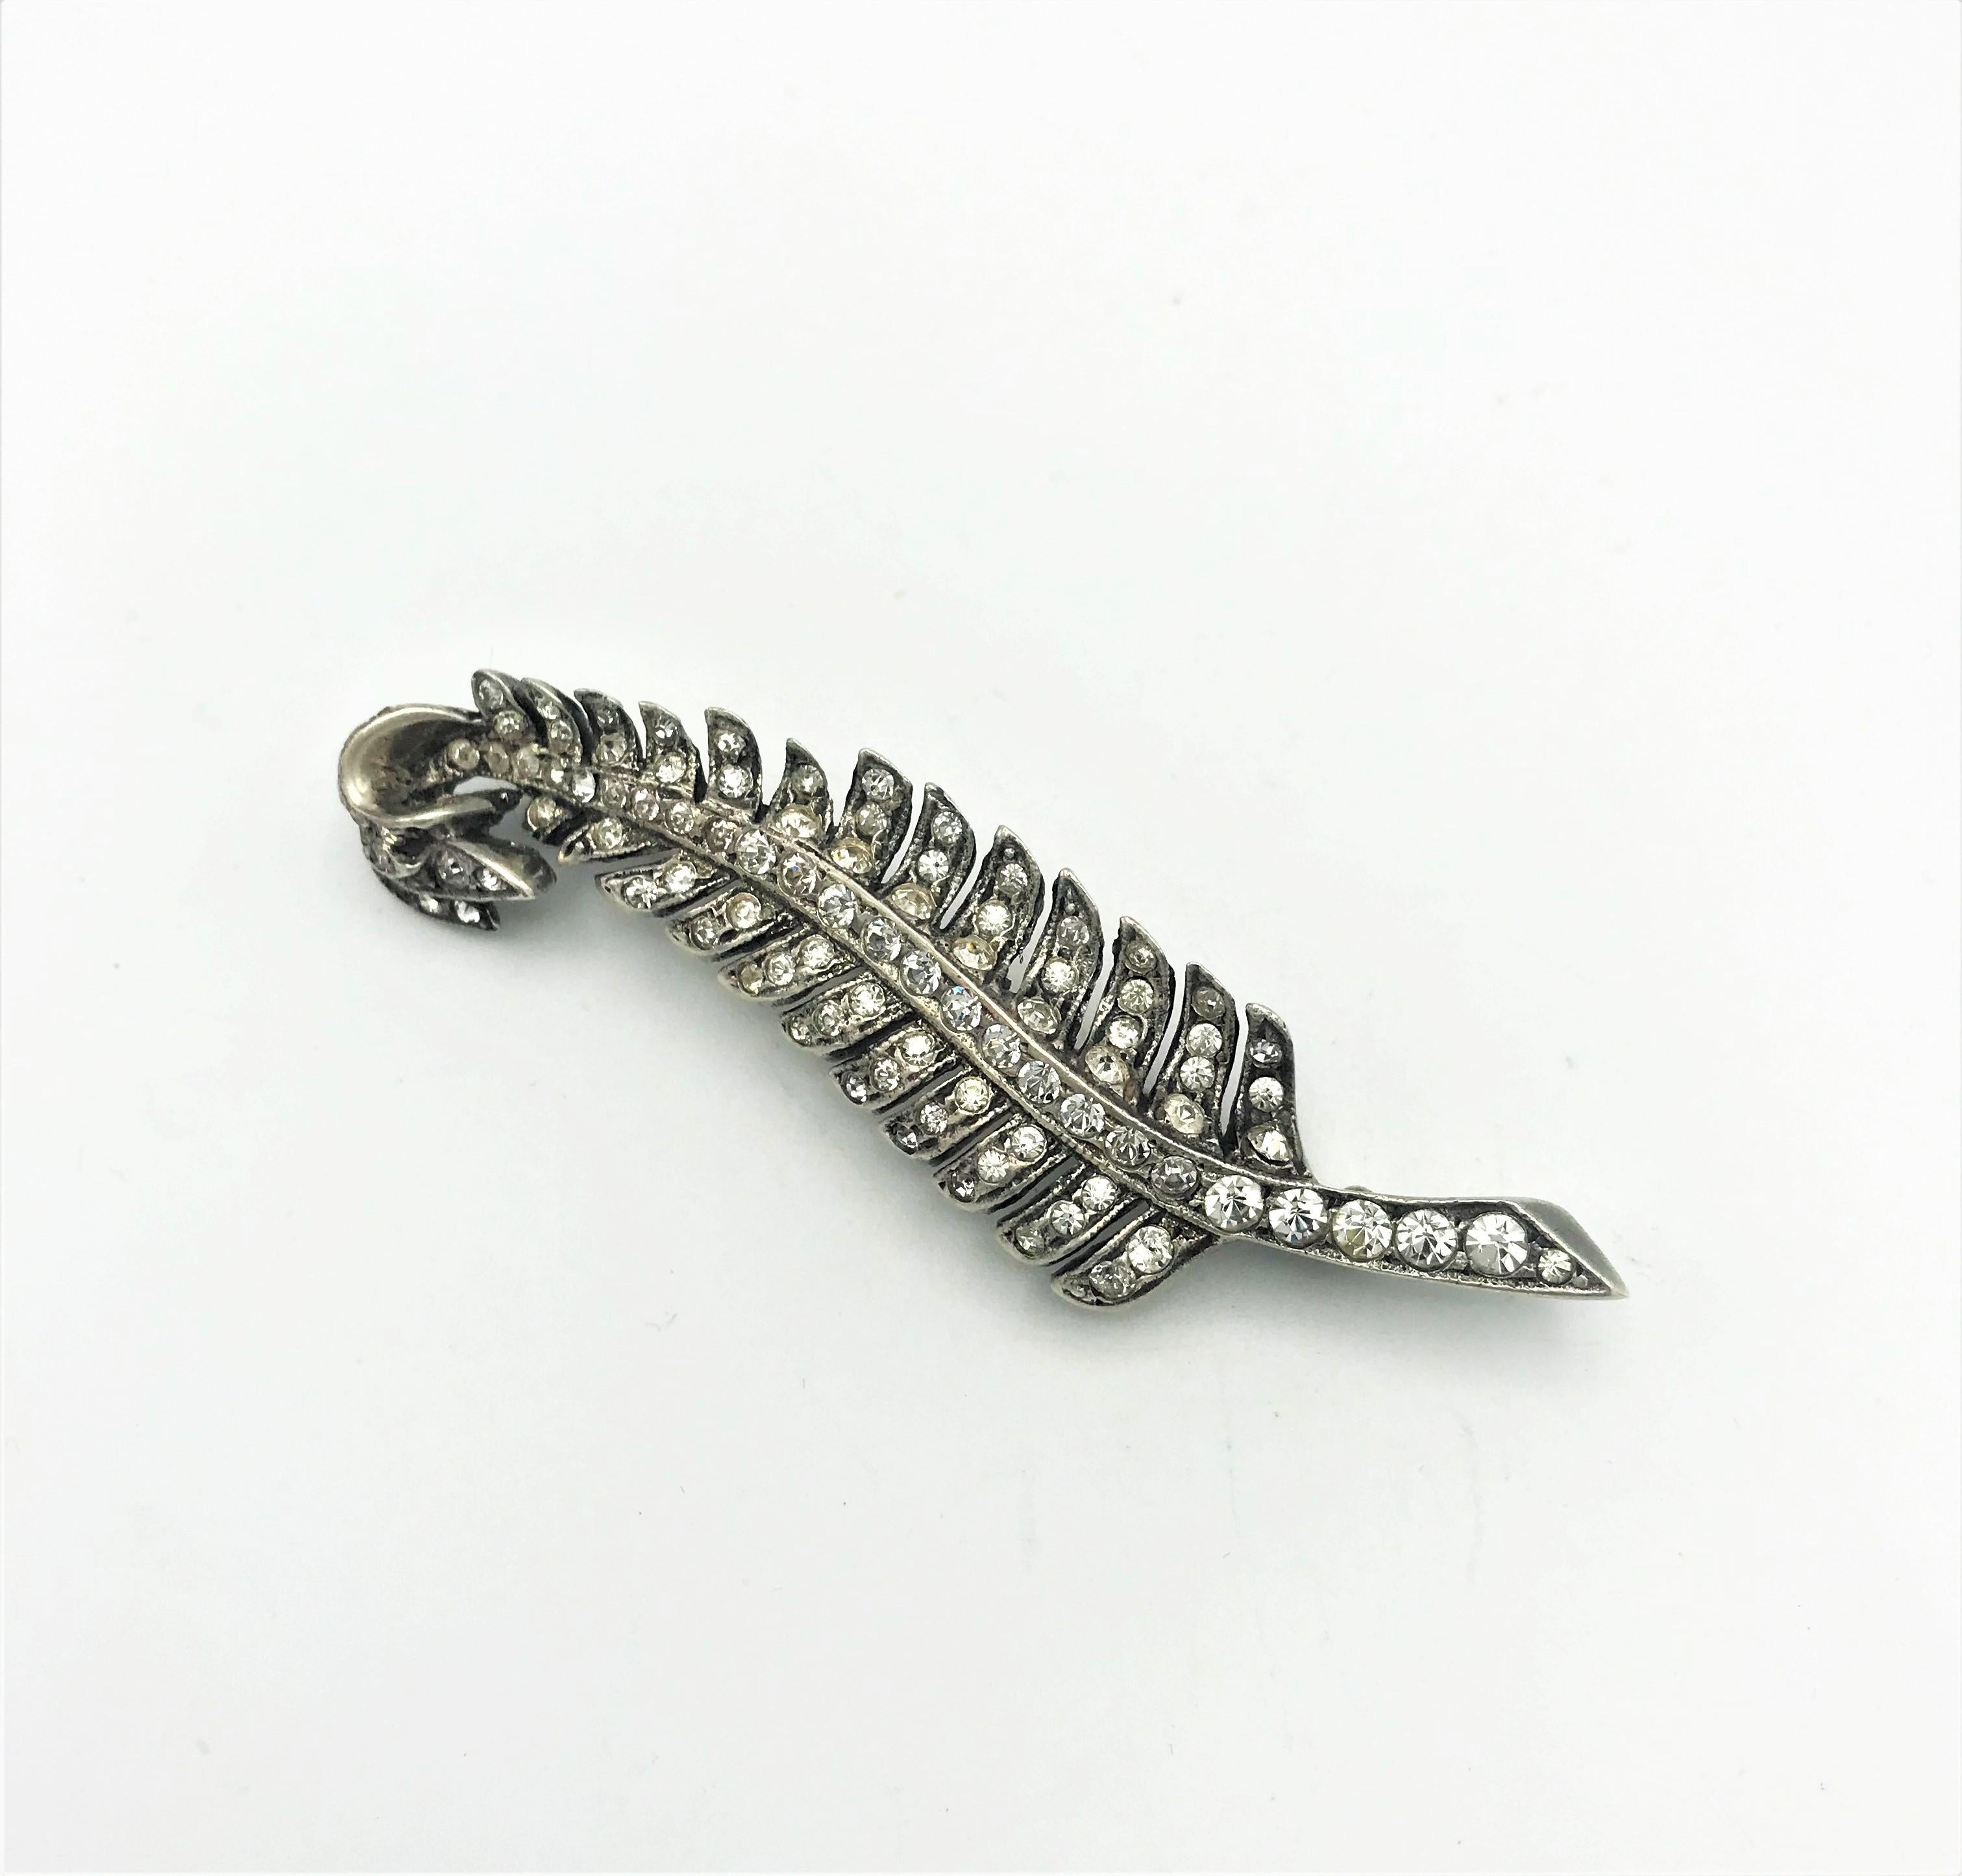 Eisenberg brooch in the shape of a feather with many rhinestones set in it. Stamped with E for Eisenberg and Sterling/ Back of the brooch.

Measurement: Hight 7 cm, wide 2 cm in vey good condition and a very nice goldsmith work! 